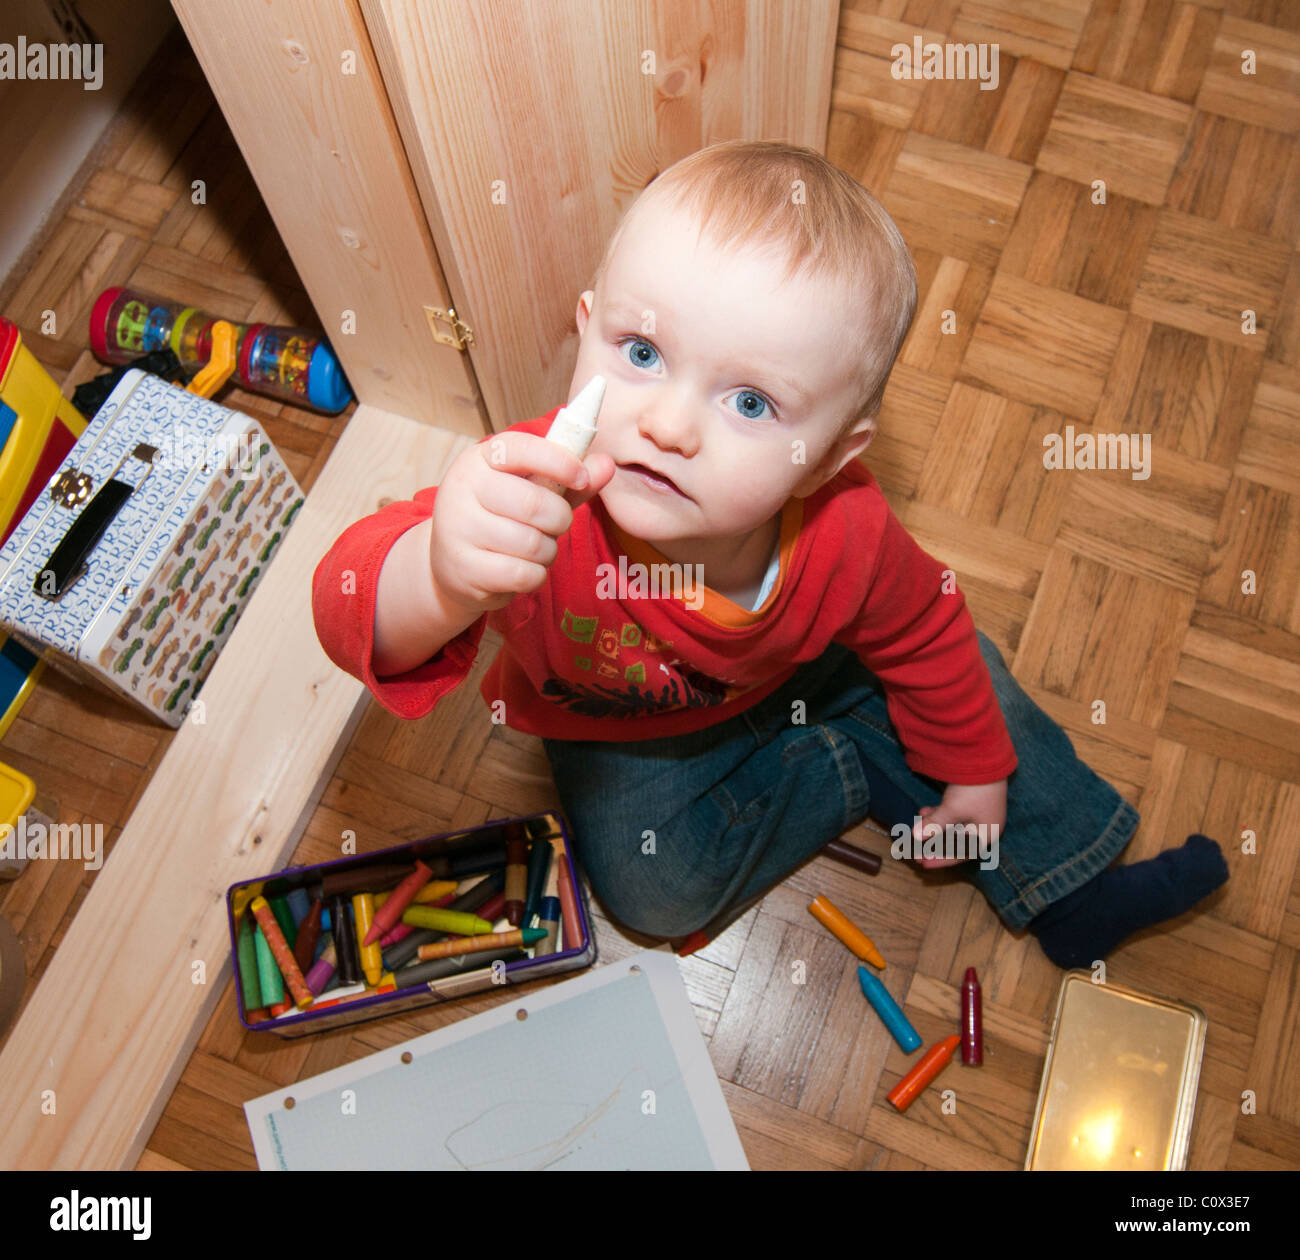 Toddler sitting on floor holding a crayon Stock Photo